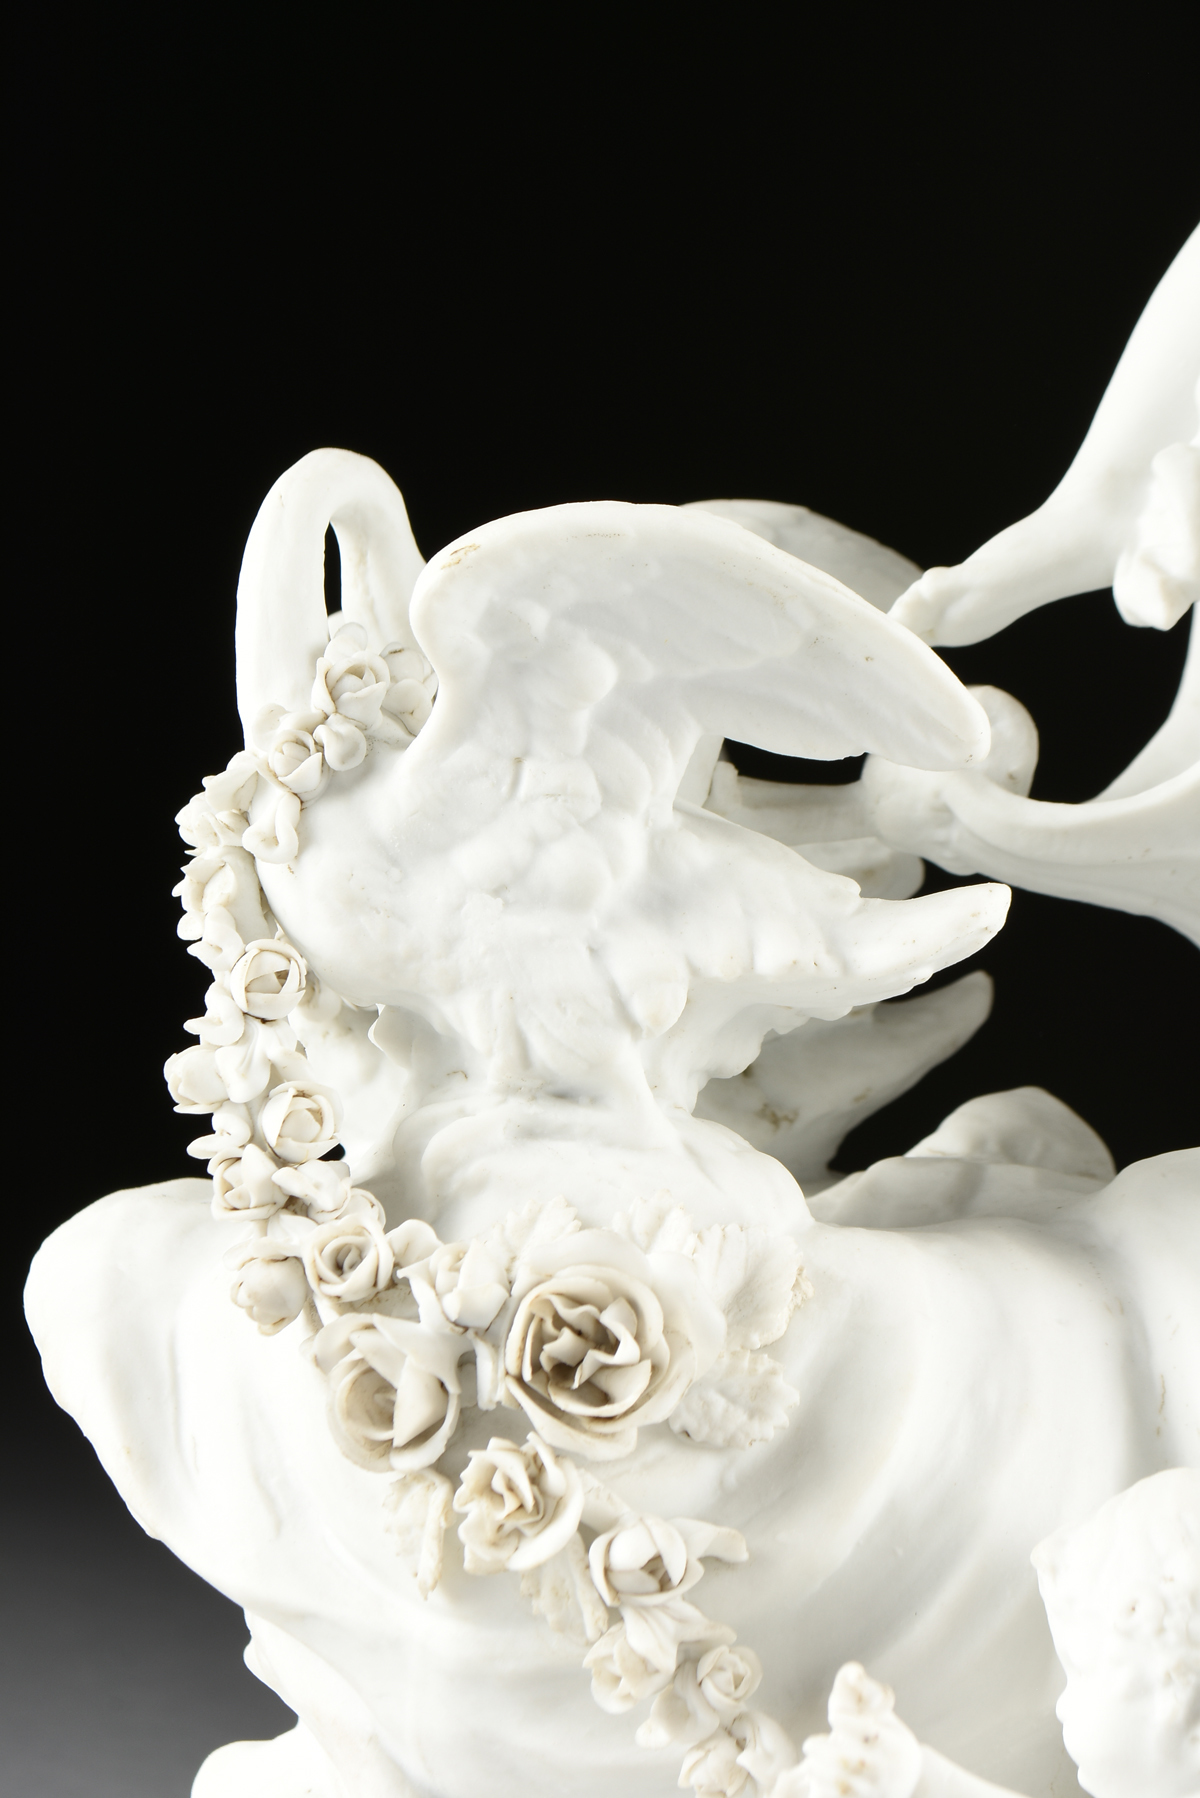 A BAROQUE REVIVAL BISQUE PORCELAIN FIGURAL GROUPING, "Allegory of Spring," POSSIBLY GERMAN, LATE - Image 8 of 11